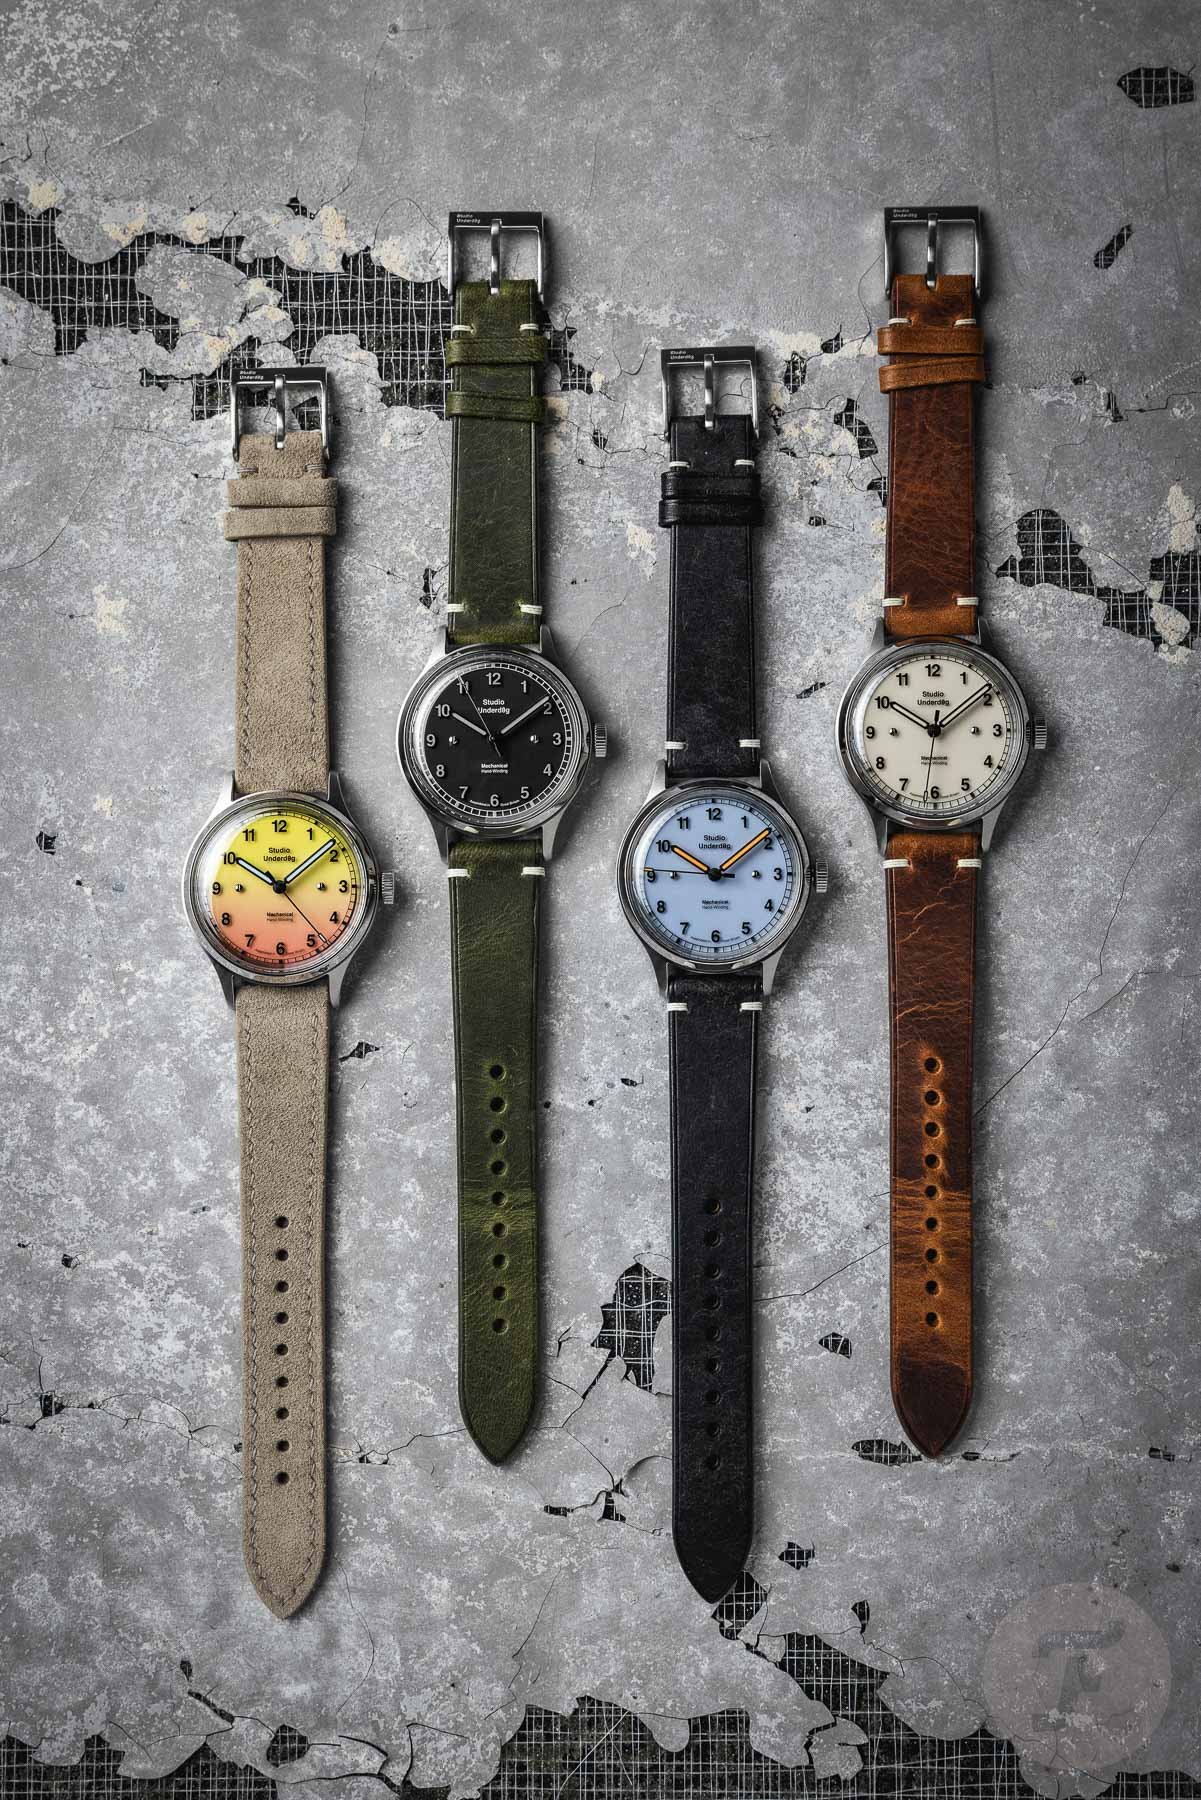 authentic watches - Studio Underd0g Watches - Page 7 Studio-Underdog-02Series-Field-Introduction-Article-1